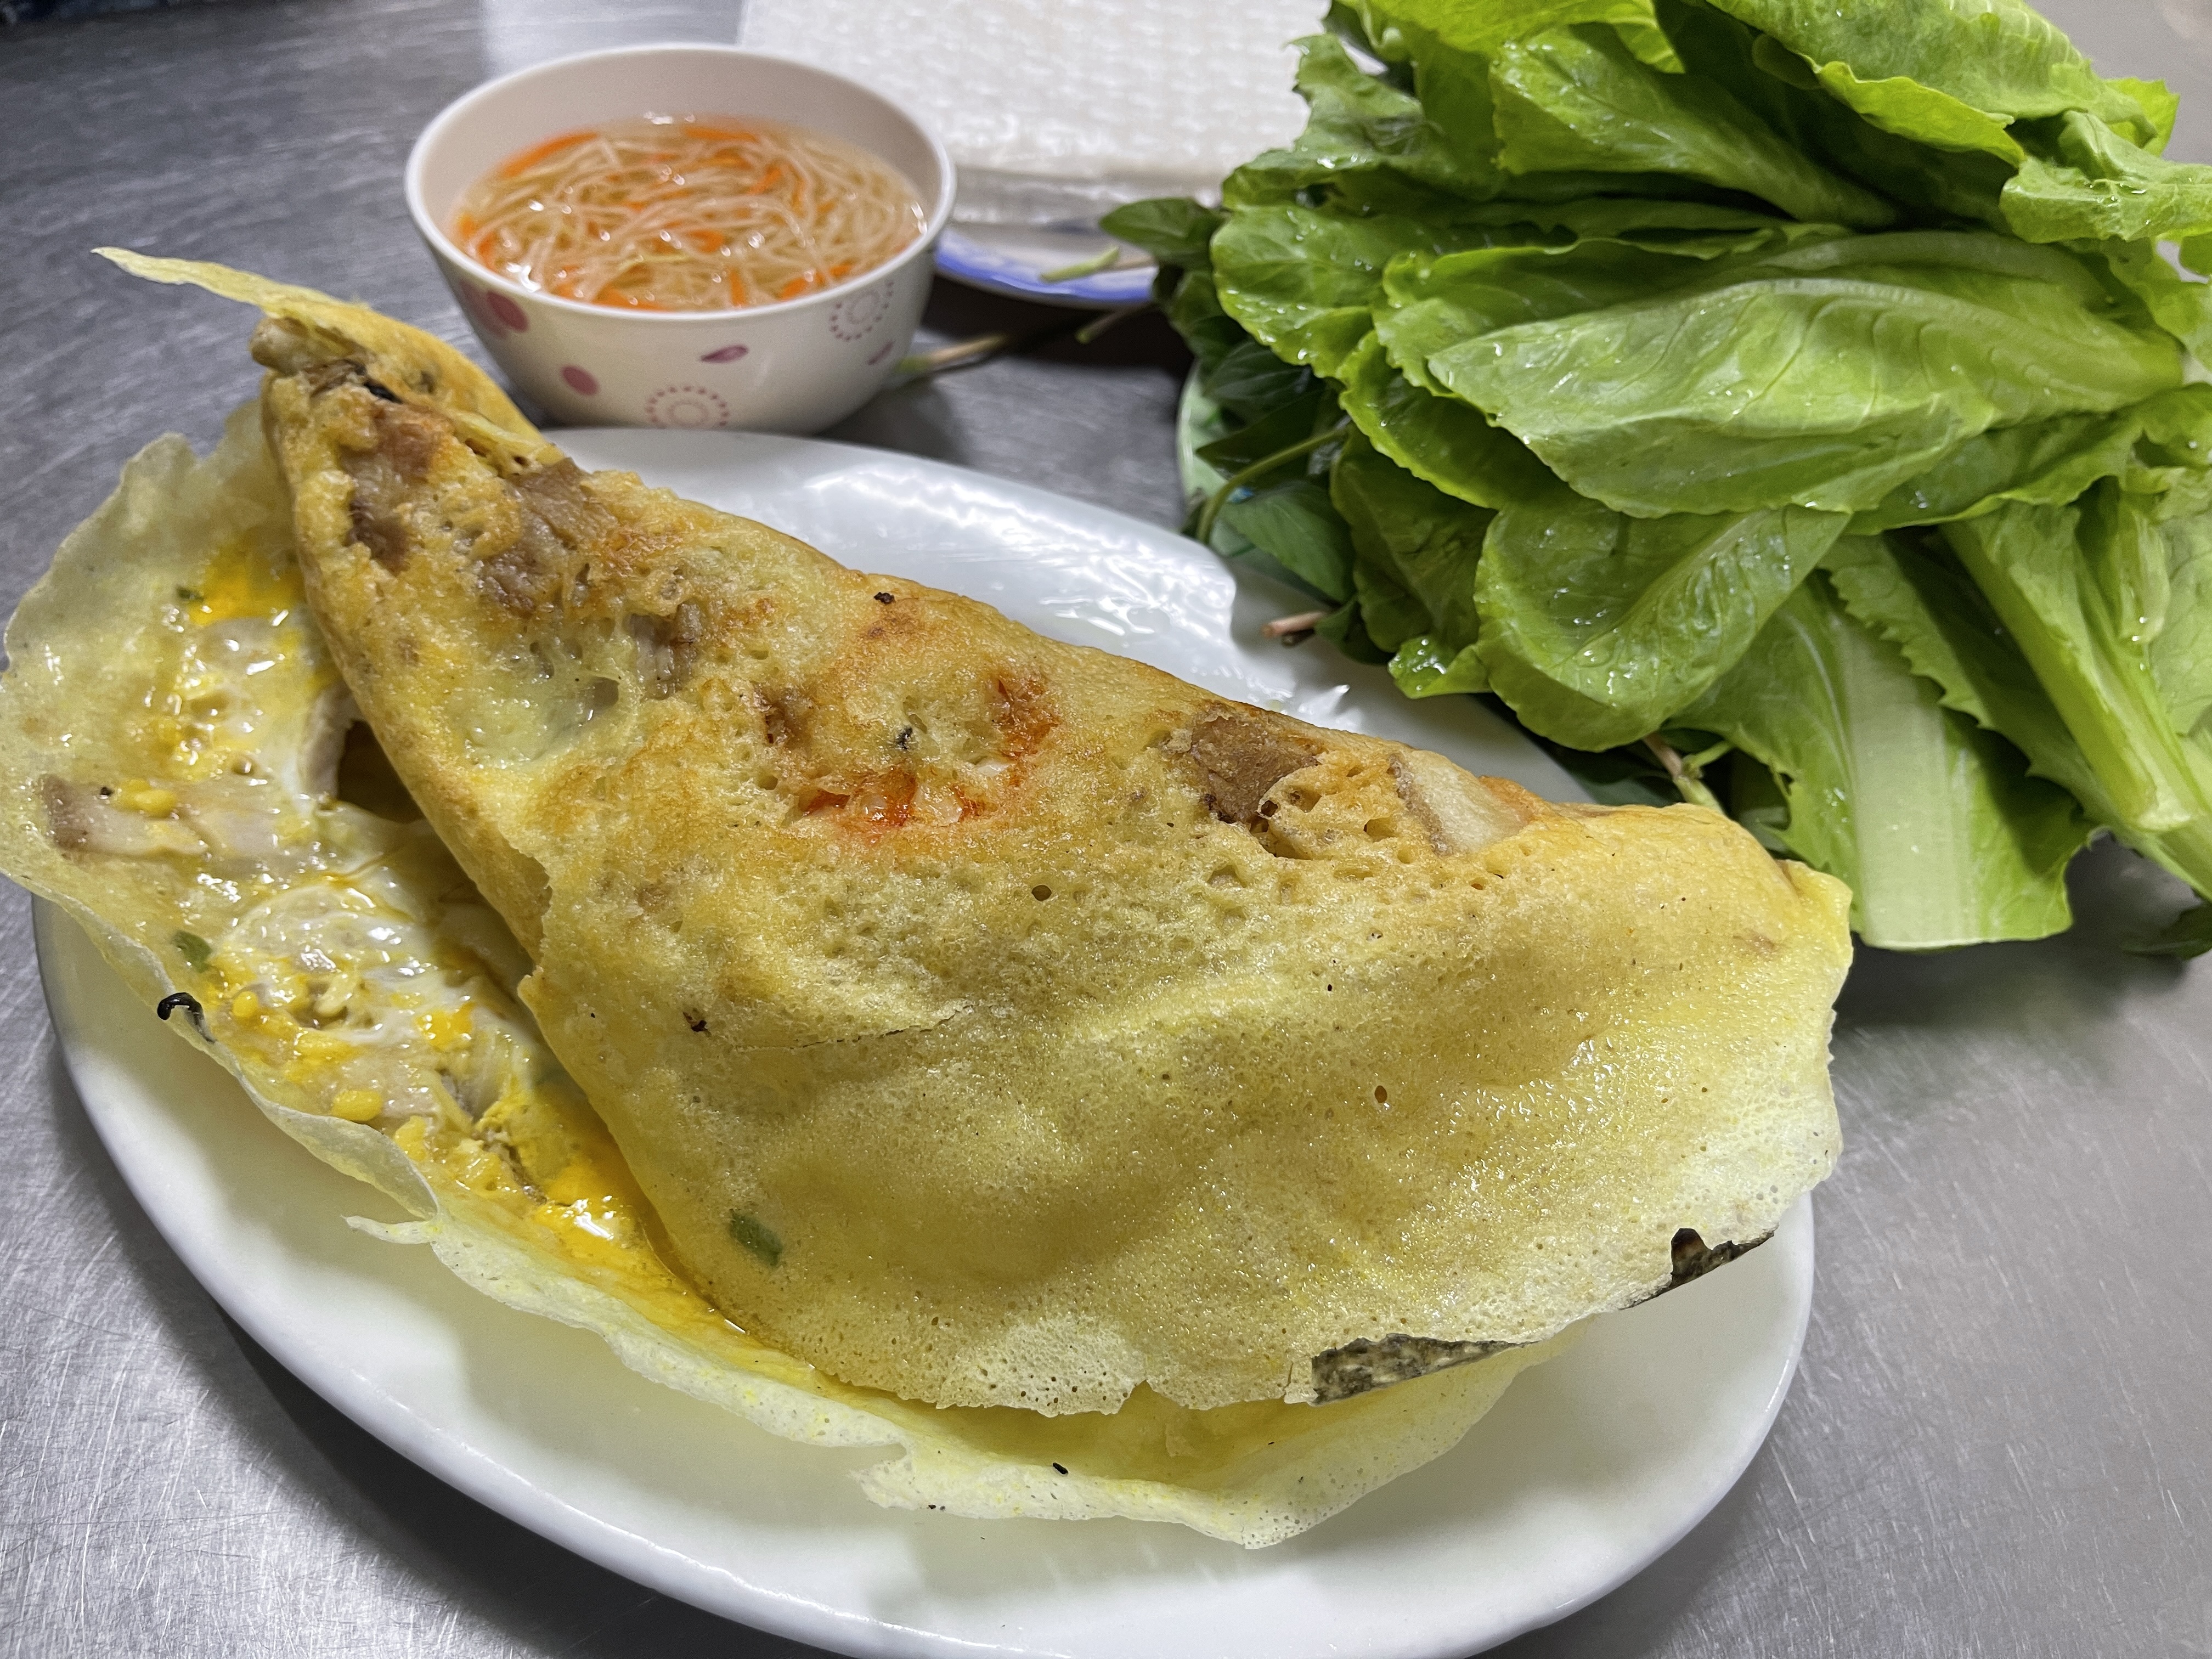 'Bánh xèo' (Vietnamese sizzling crepes) is served with veggies and fish sauce at Bánh Xèo 46A in District 1, Ho Chi Minh City. Photo: Dong Nguyen / Tuoi Tre News